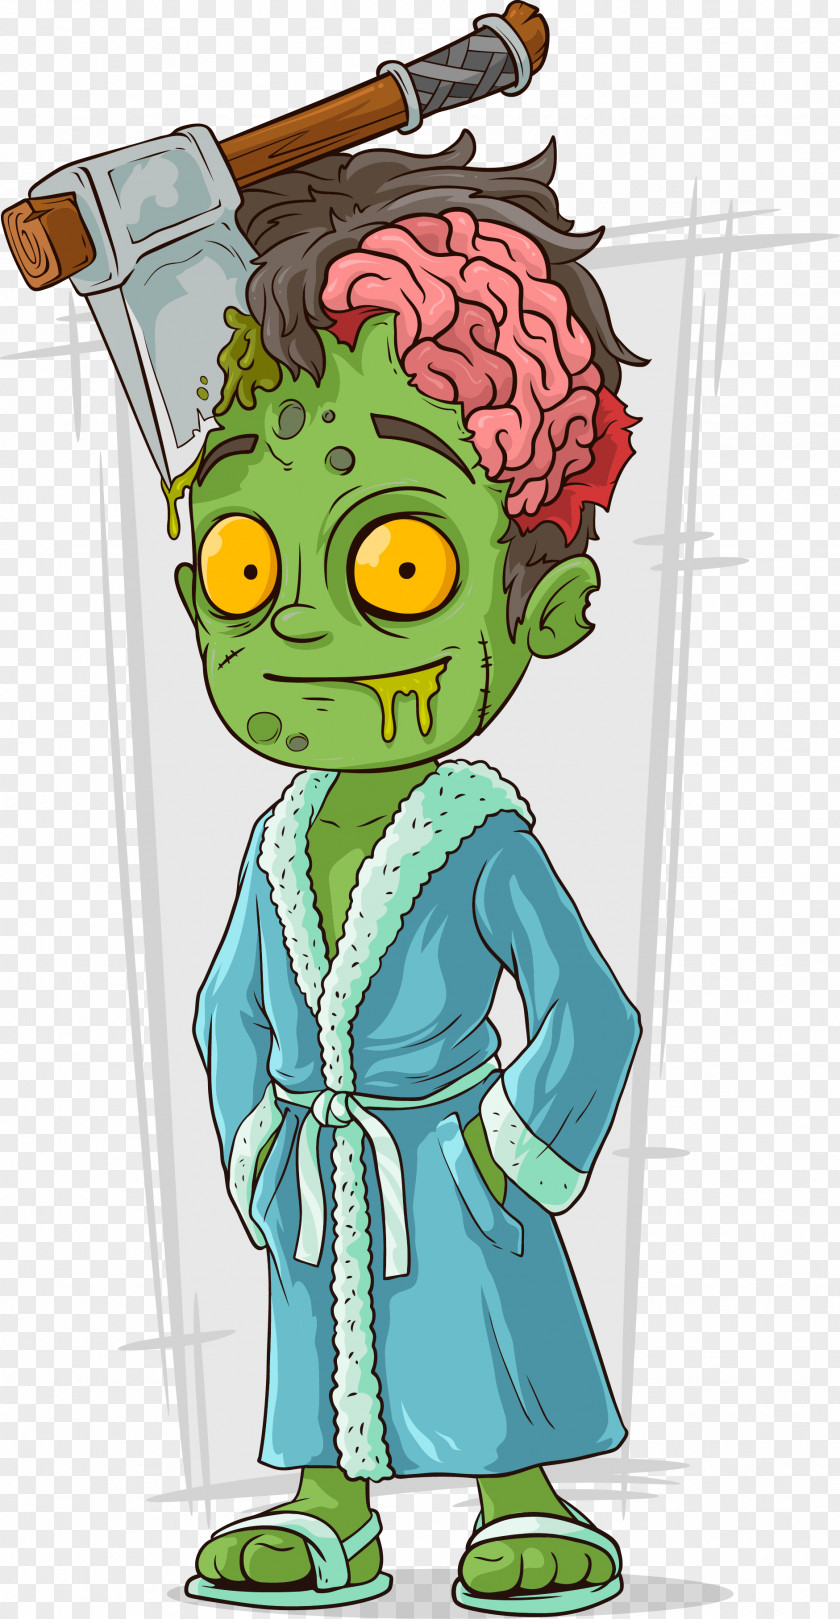 Zombie Cartoon Illustration PNG Illustration, cartoon character clipart PNG